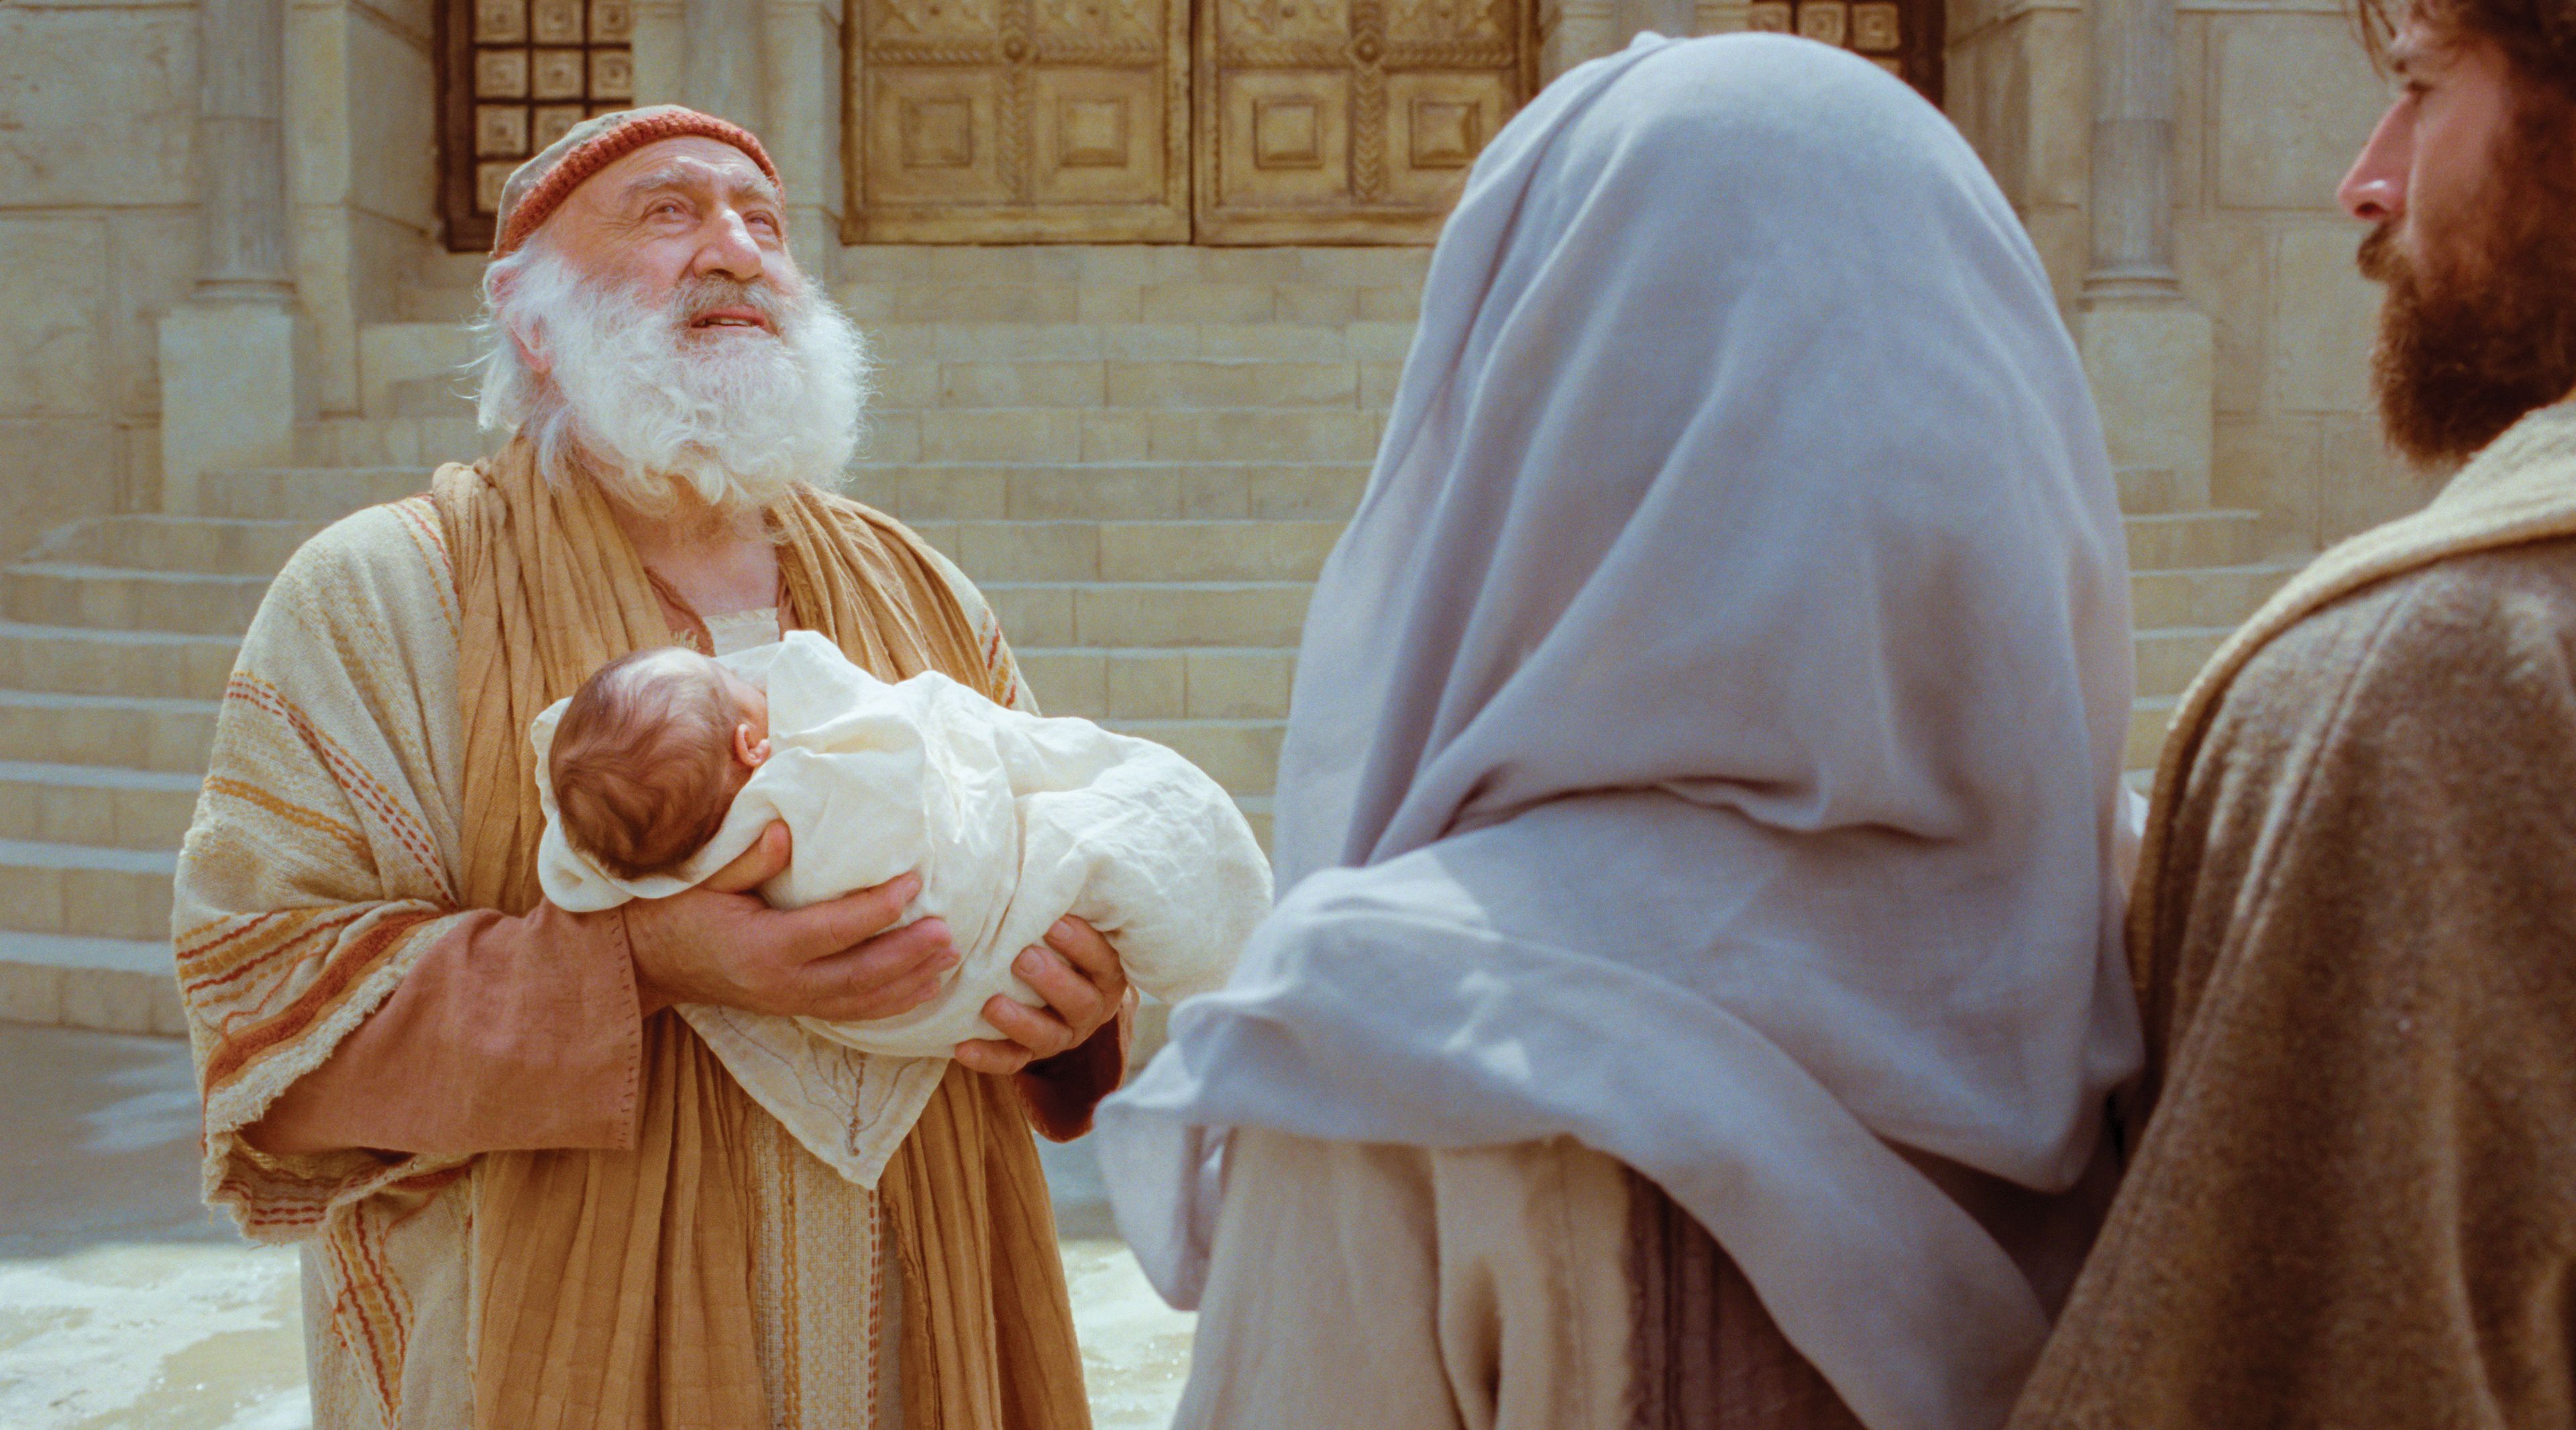 A priest holds Christ as a baby.